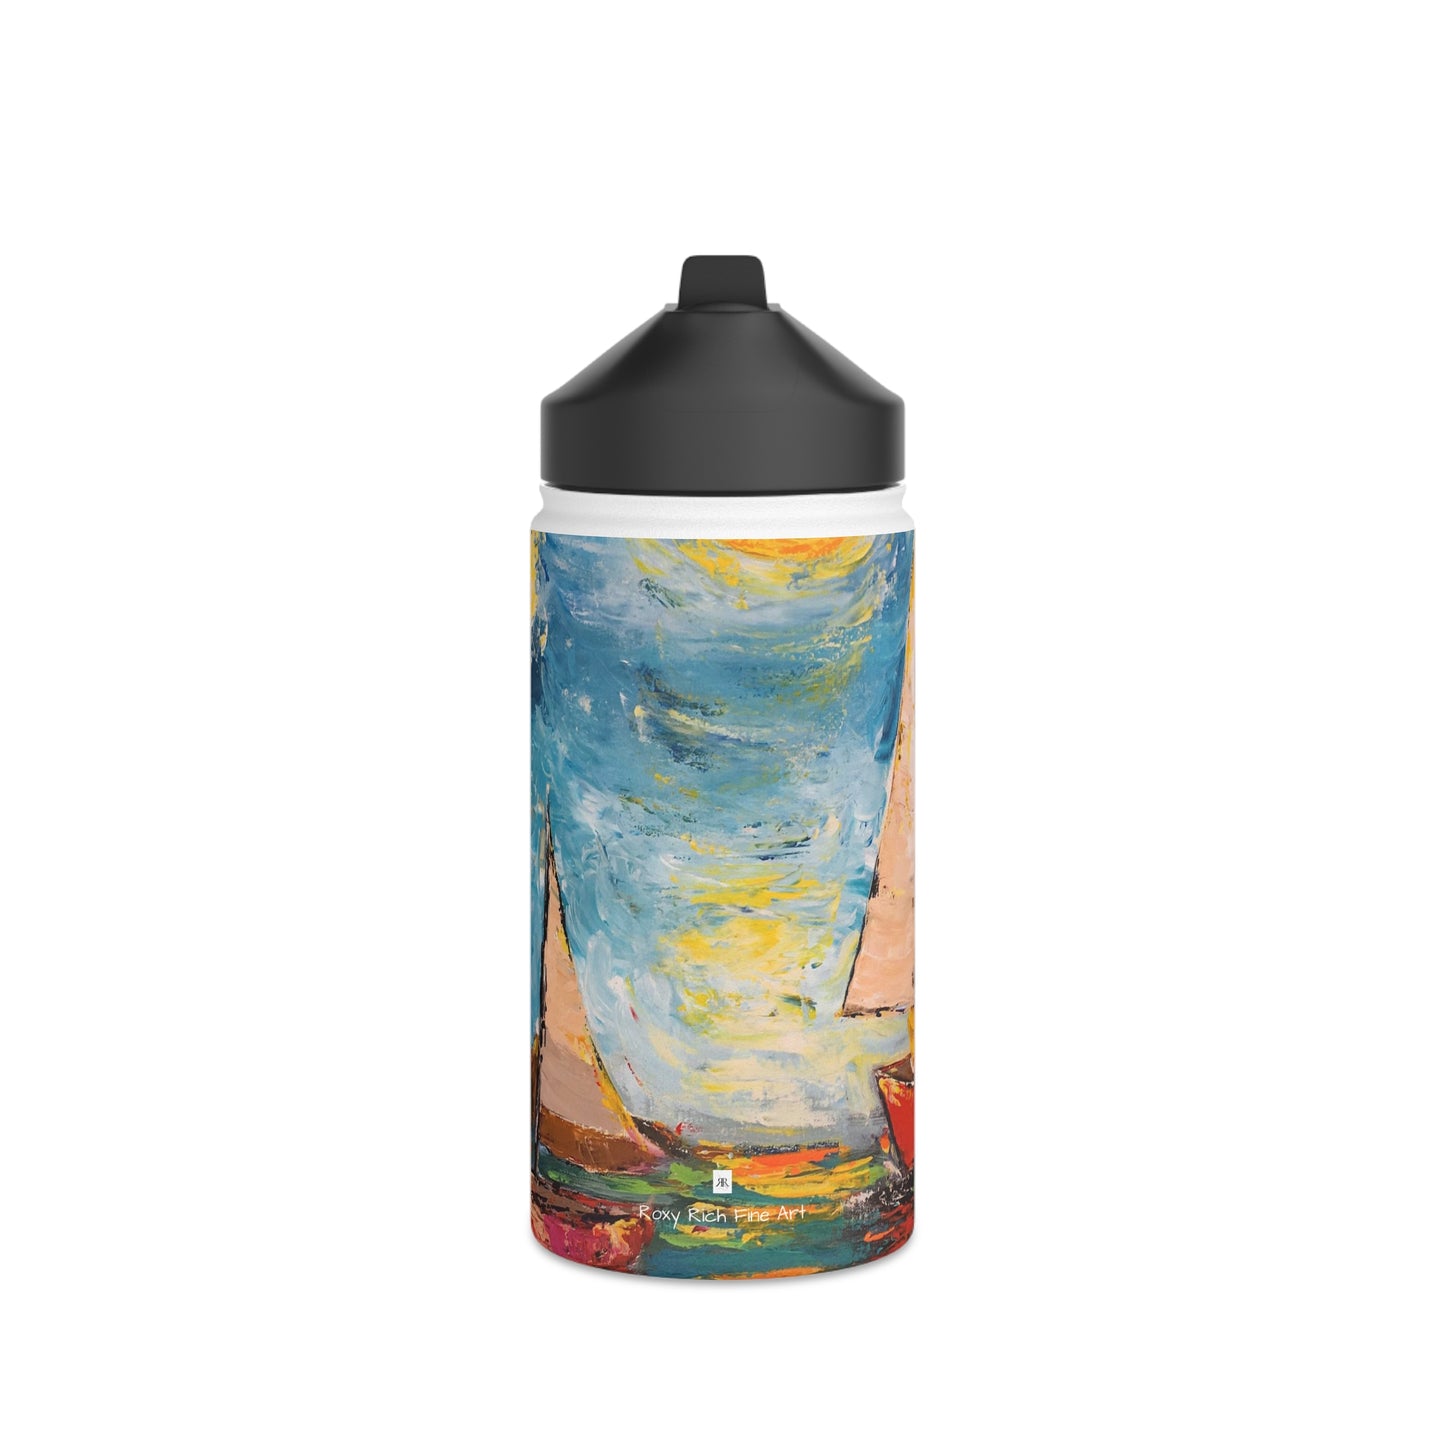 Sunny Sails- Stainless Steel Water Bottle, Standard Lid